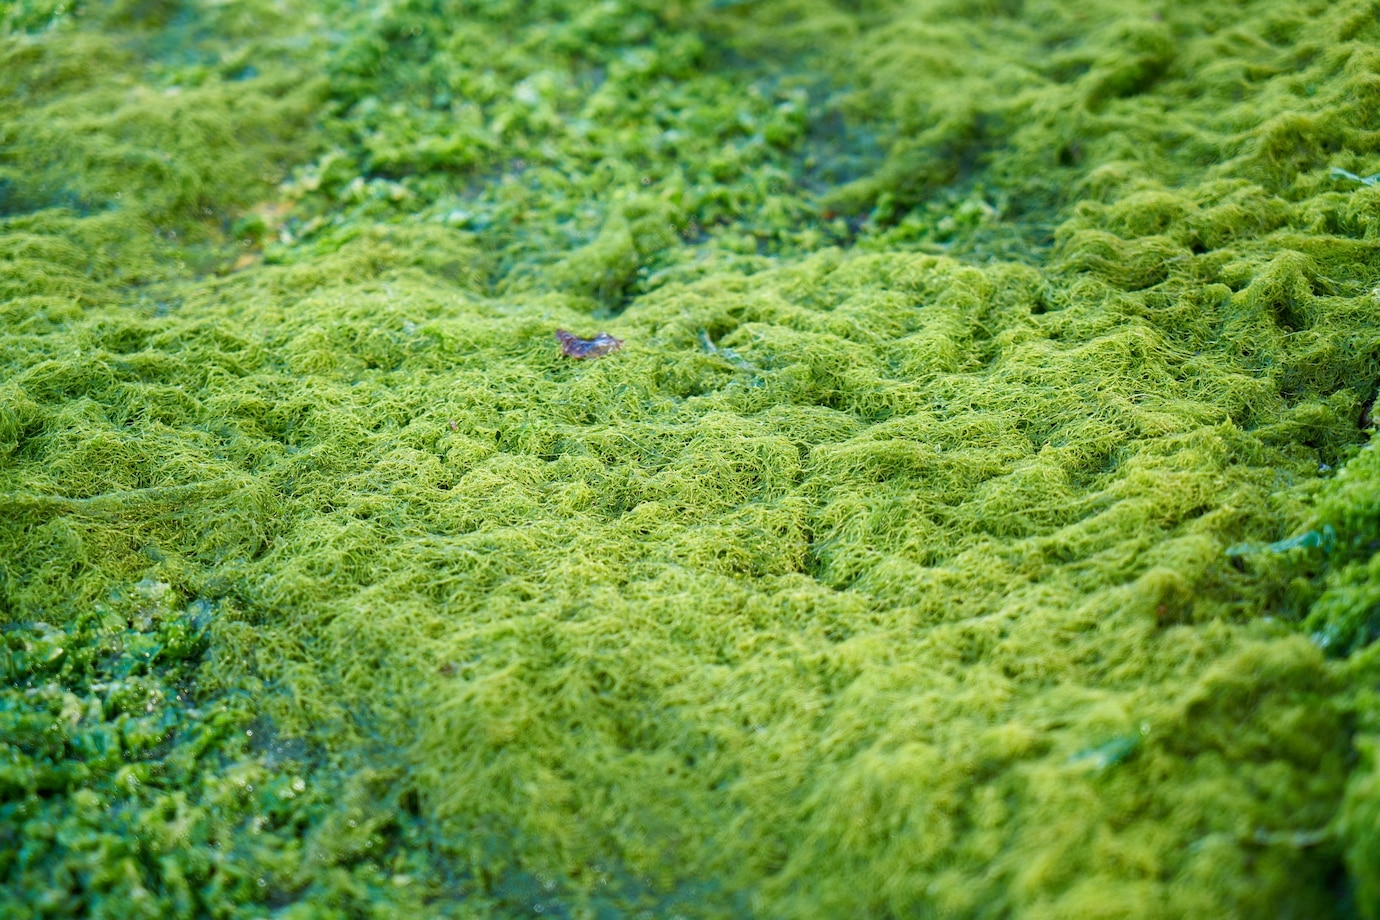 Algae biofuel back from dead, now with carbon capture